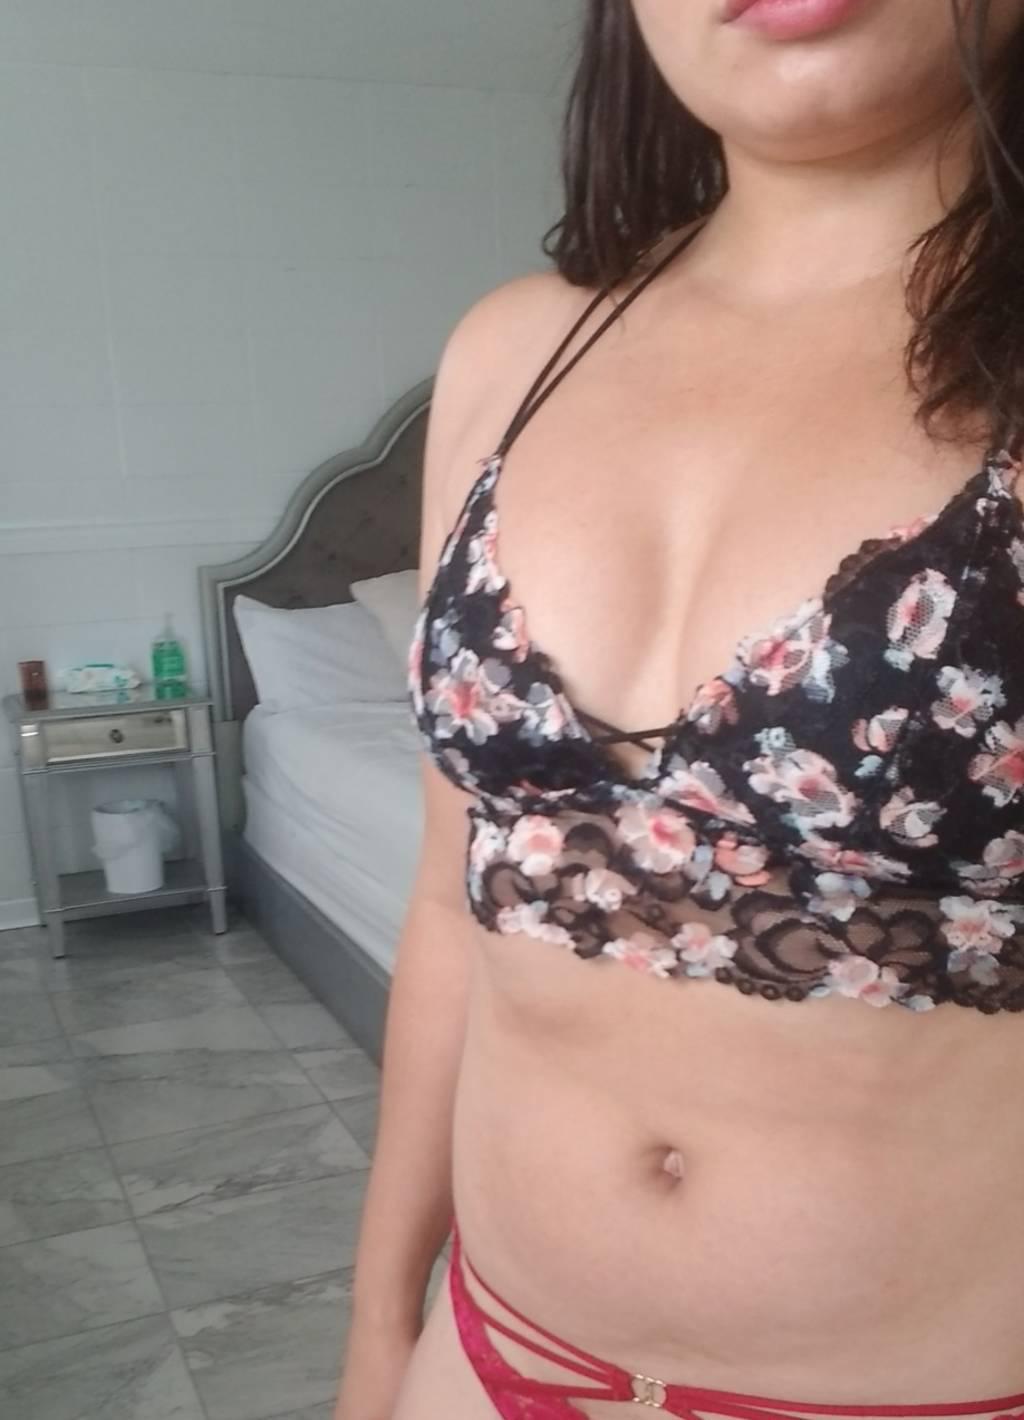 Exotic beauty! massage included! extras available cum play